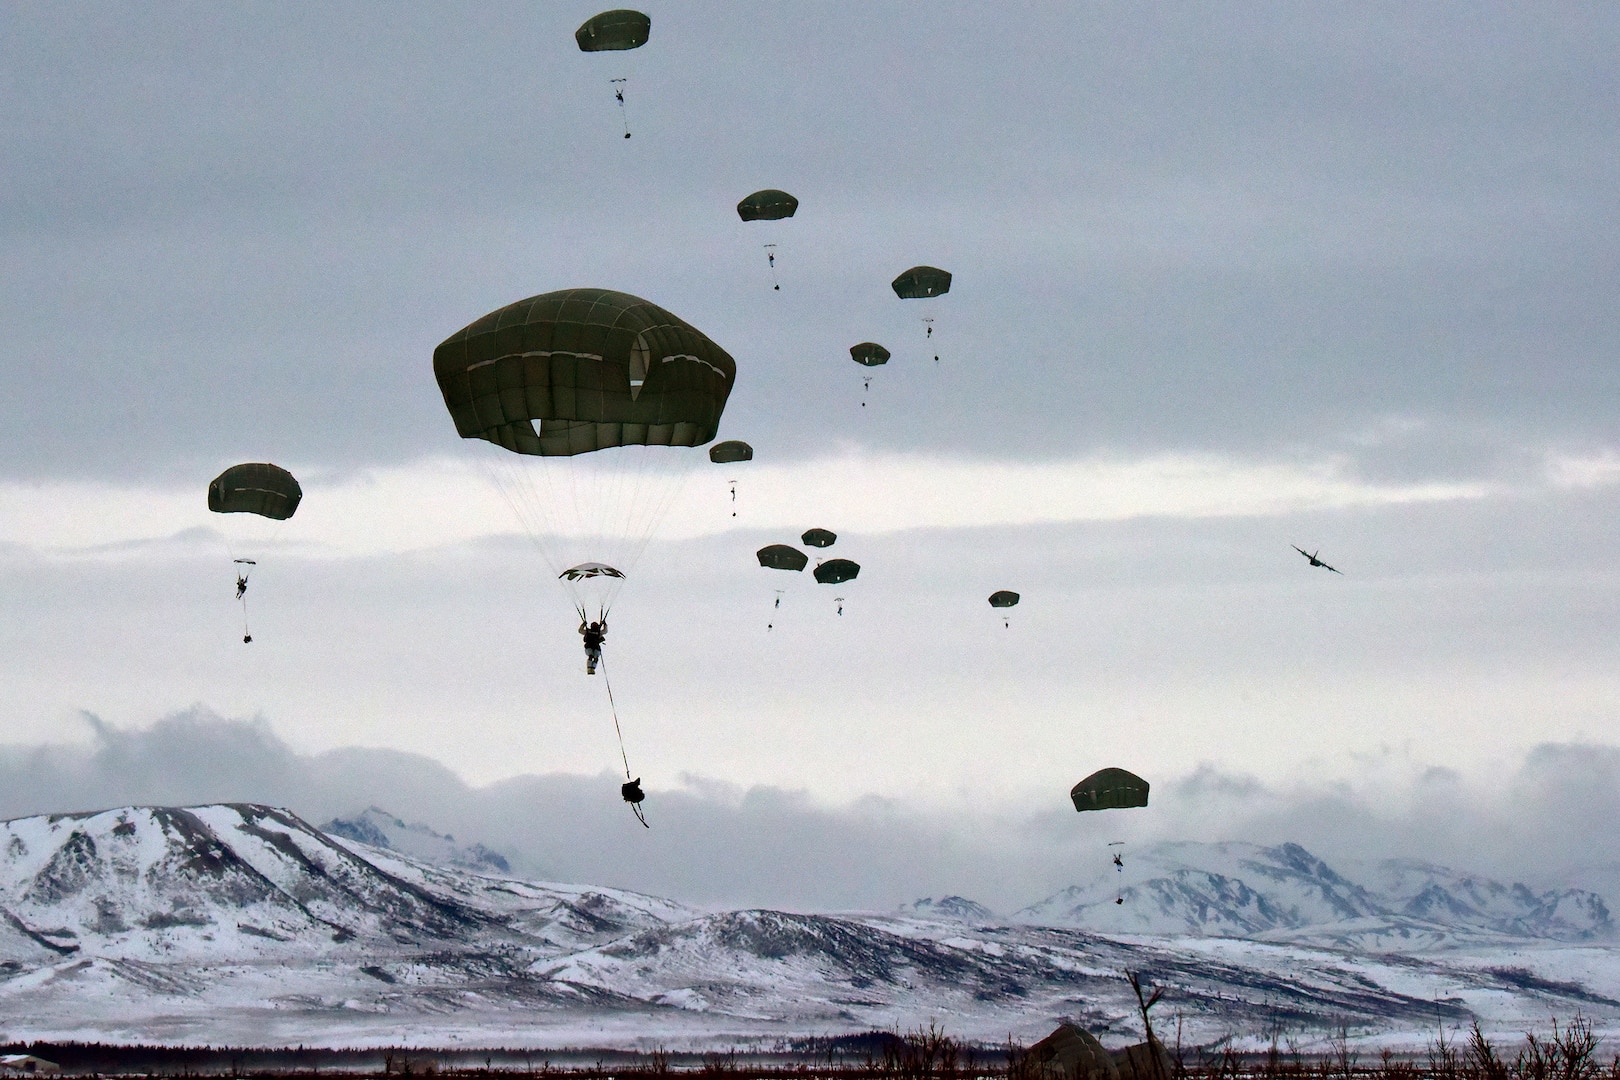 Paratroopers from C Troop, 1st Squadron (Airborne), 40th Cavalry Regiment jump into Donnelly Drop Zone Feb. 29, 2020, from a Royal Canadian Air Force C-130 as part of Arctic Edge 2020.  As a Homeland Defense exercise, AE20 is designed to provide high quality and effective training in the extreme cold-weather conditions found in Arctic environments. The exercise is conducted under the authority of North American Aerospace Defense Command and U.S. Northern Command. AE20 is the largest joint exercise scheduled in Alaska this year. (Army photo/John Pennell)